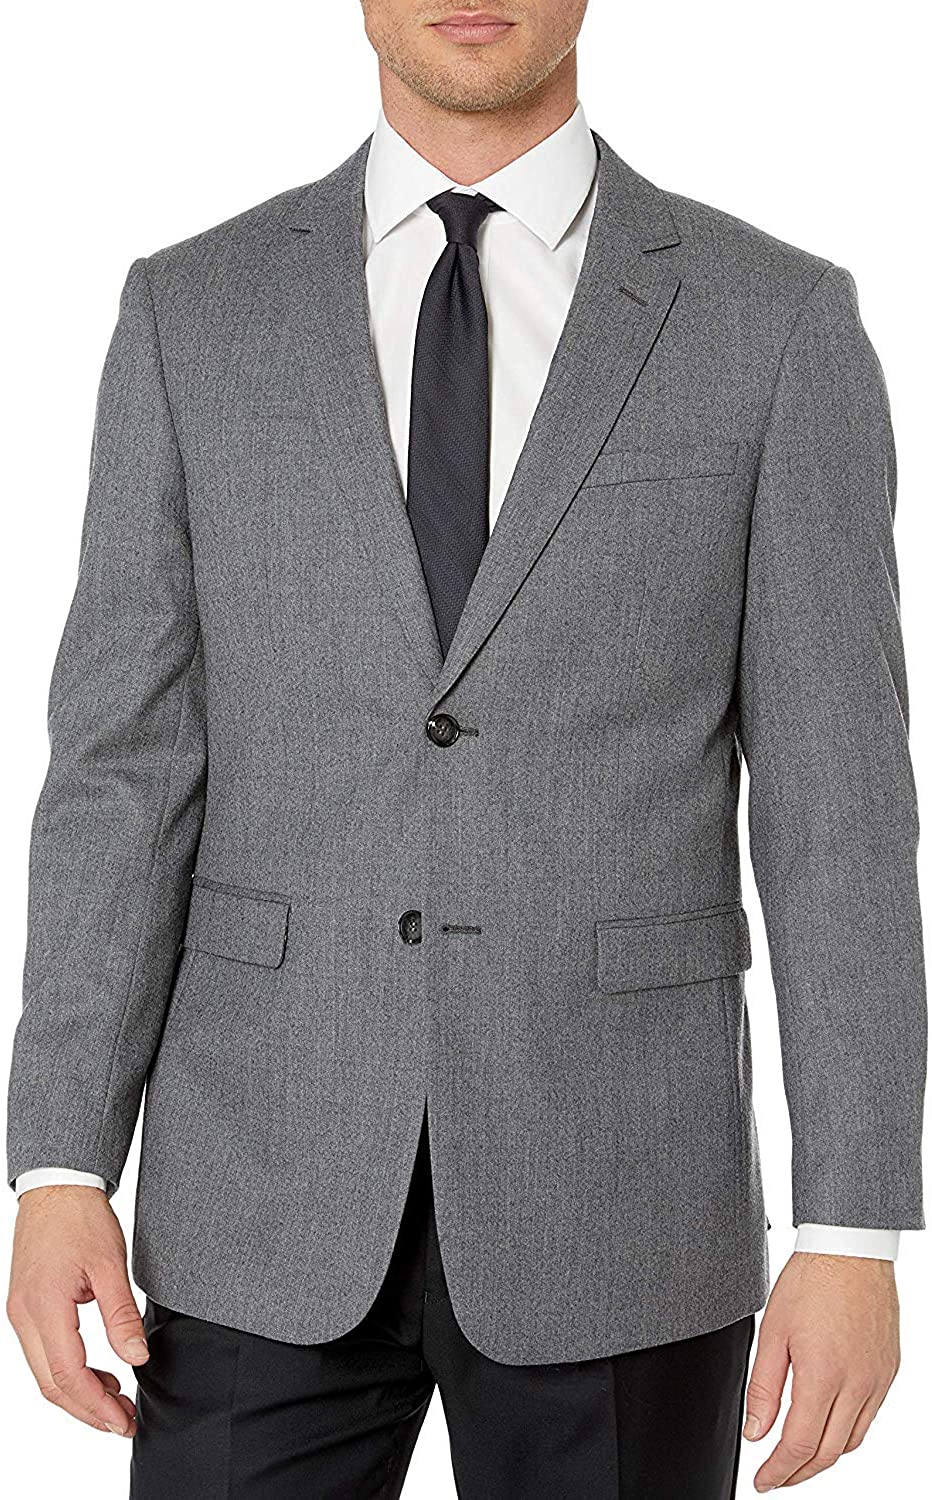 Many Styles and Colors Adam Baker Mens Single Breasted 100% Wool Ultra Slim Fit Blazer/Sport Coat 